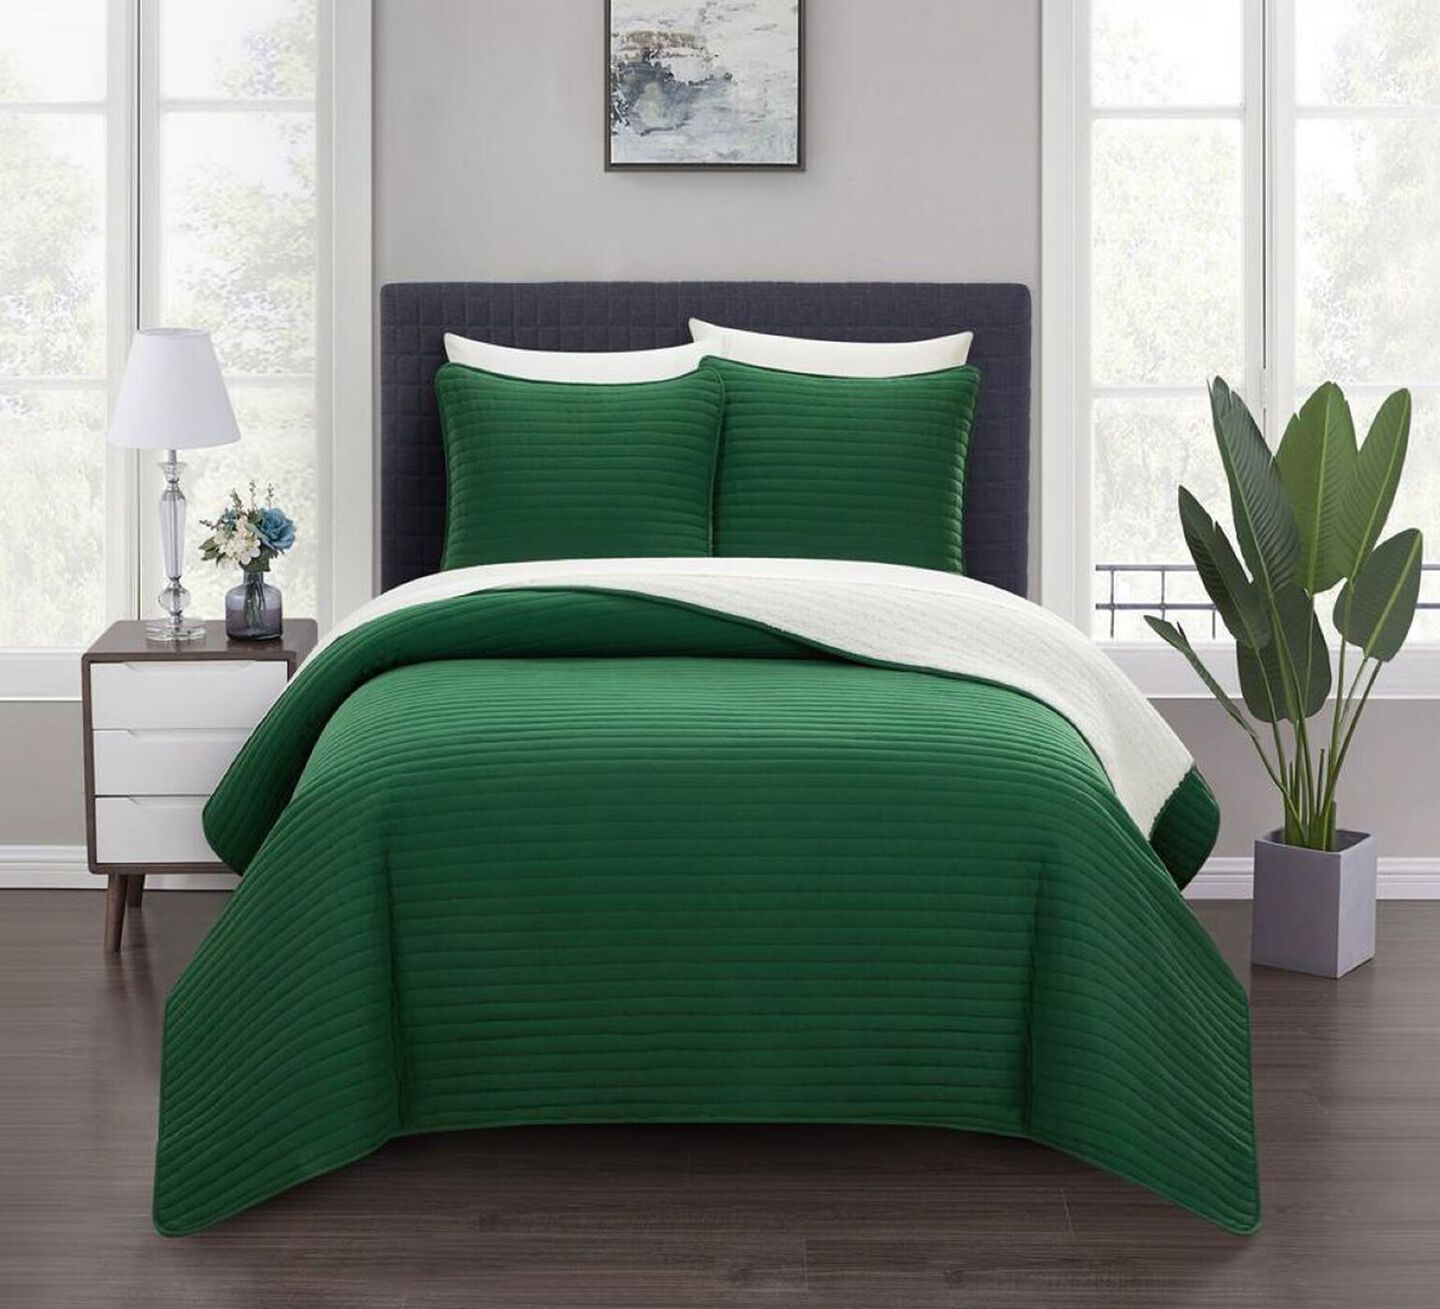 Bed with dark grey bedframe and green and white bedding